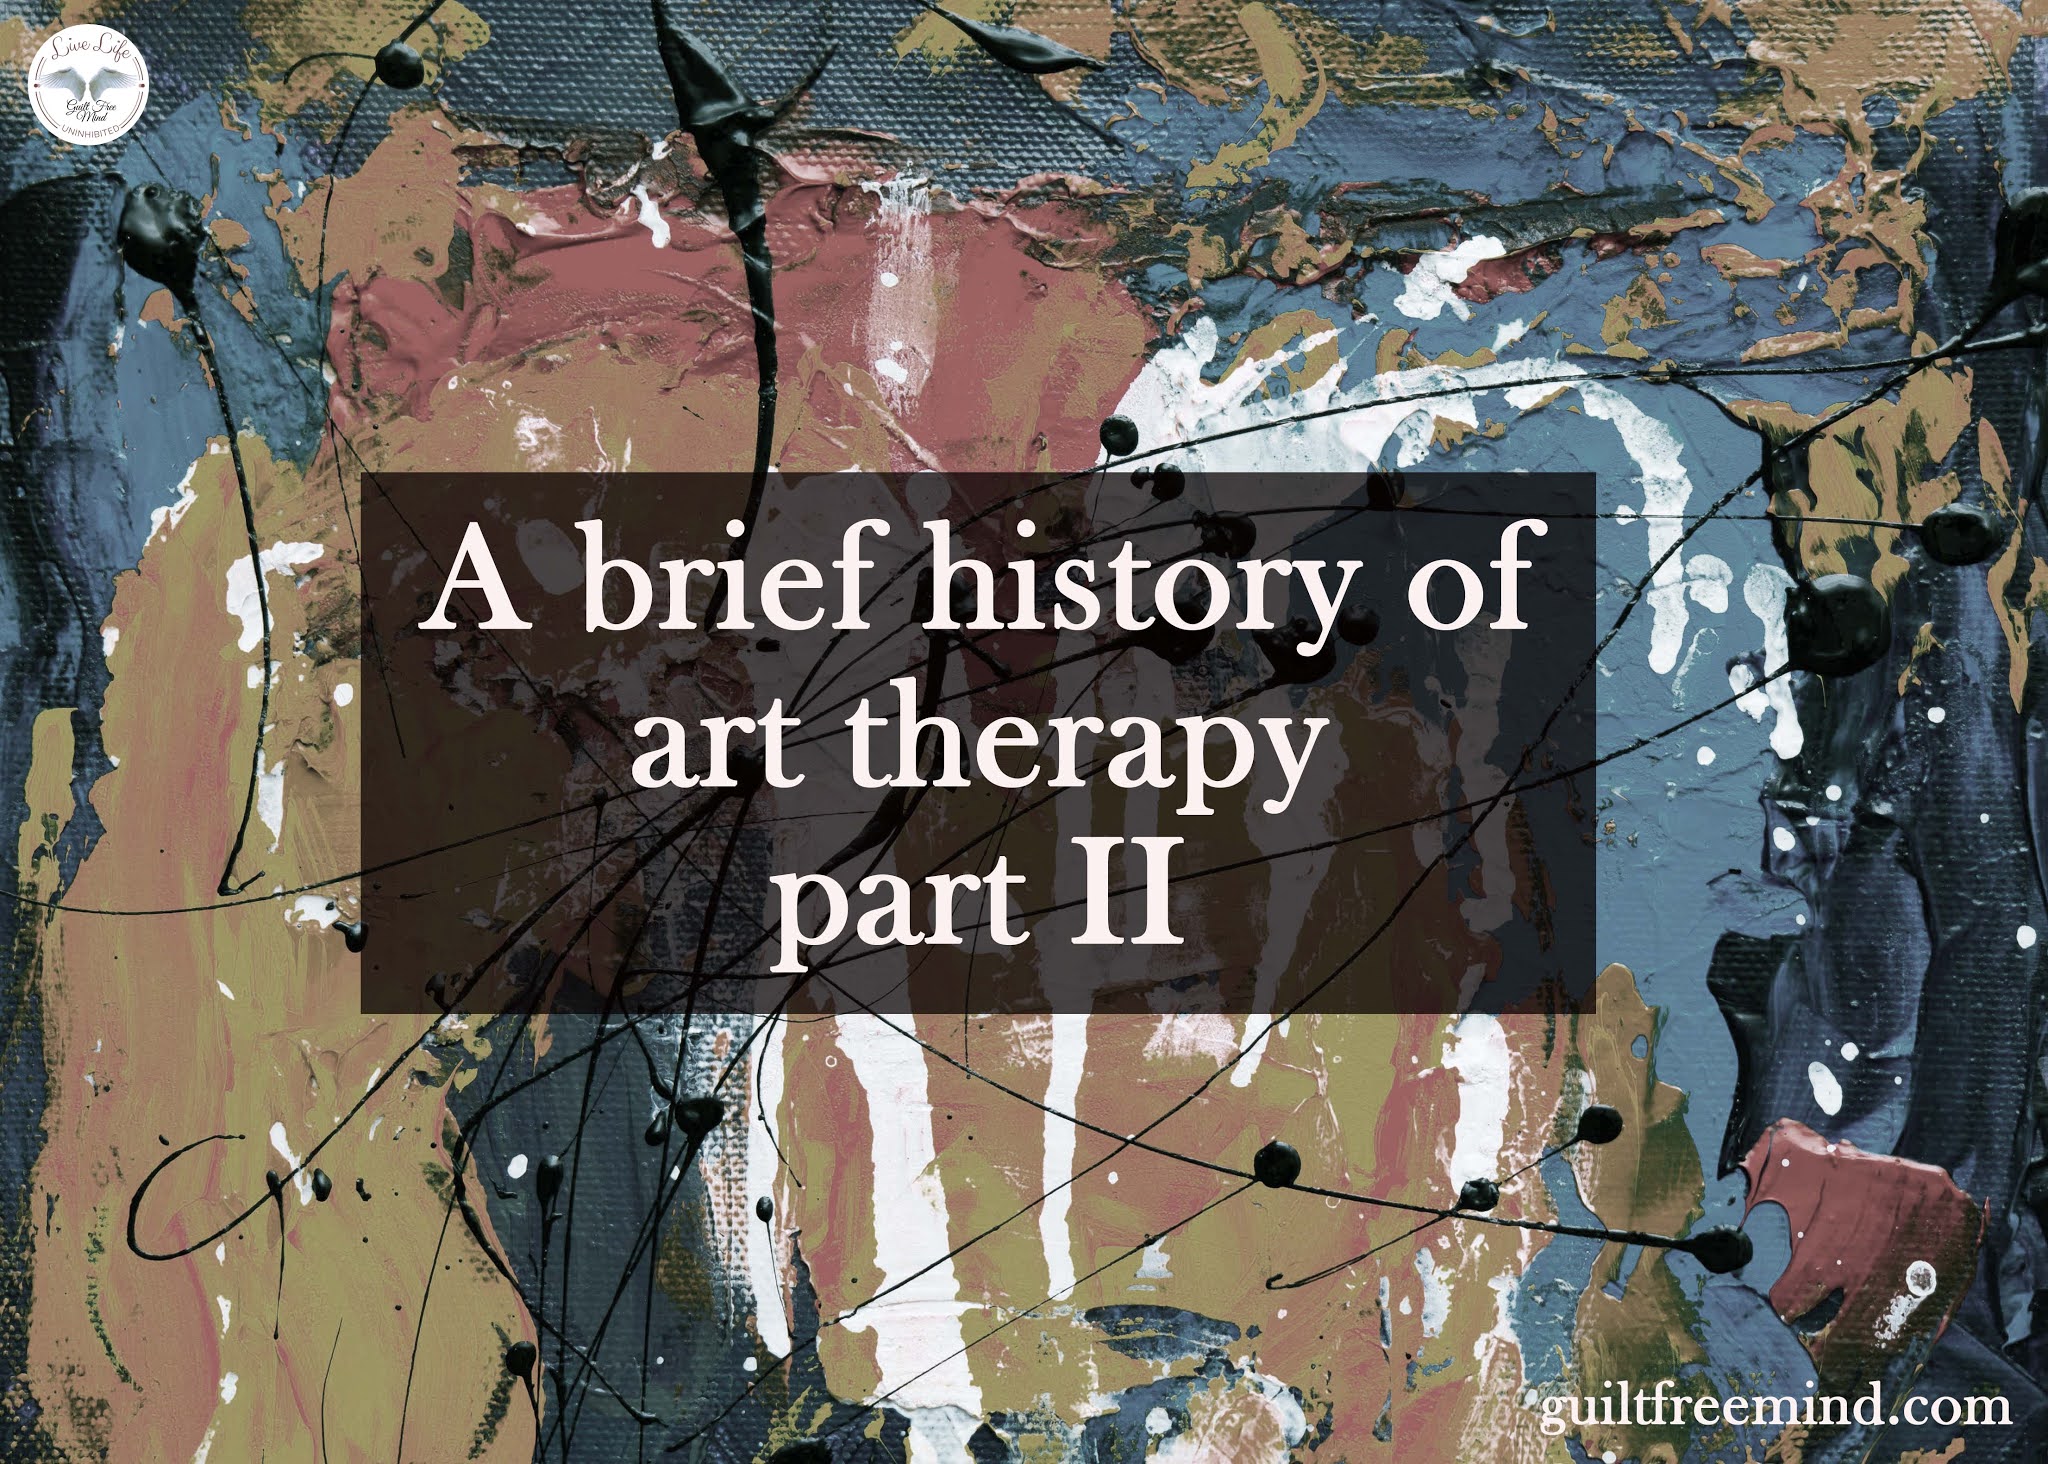 A brief history of art therapy